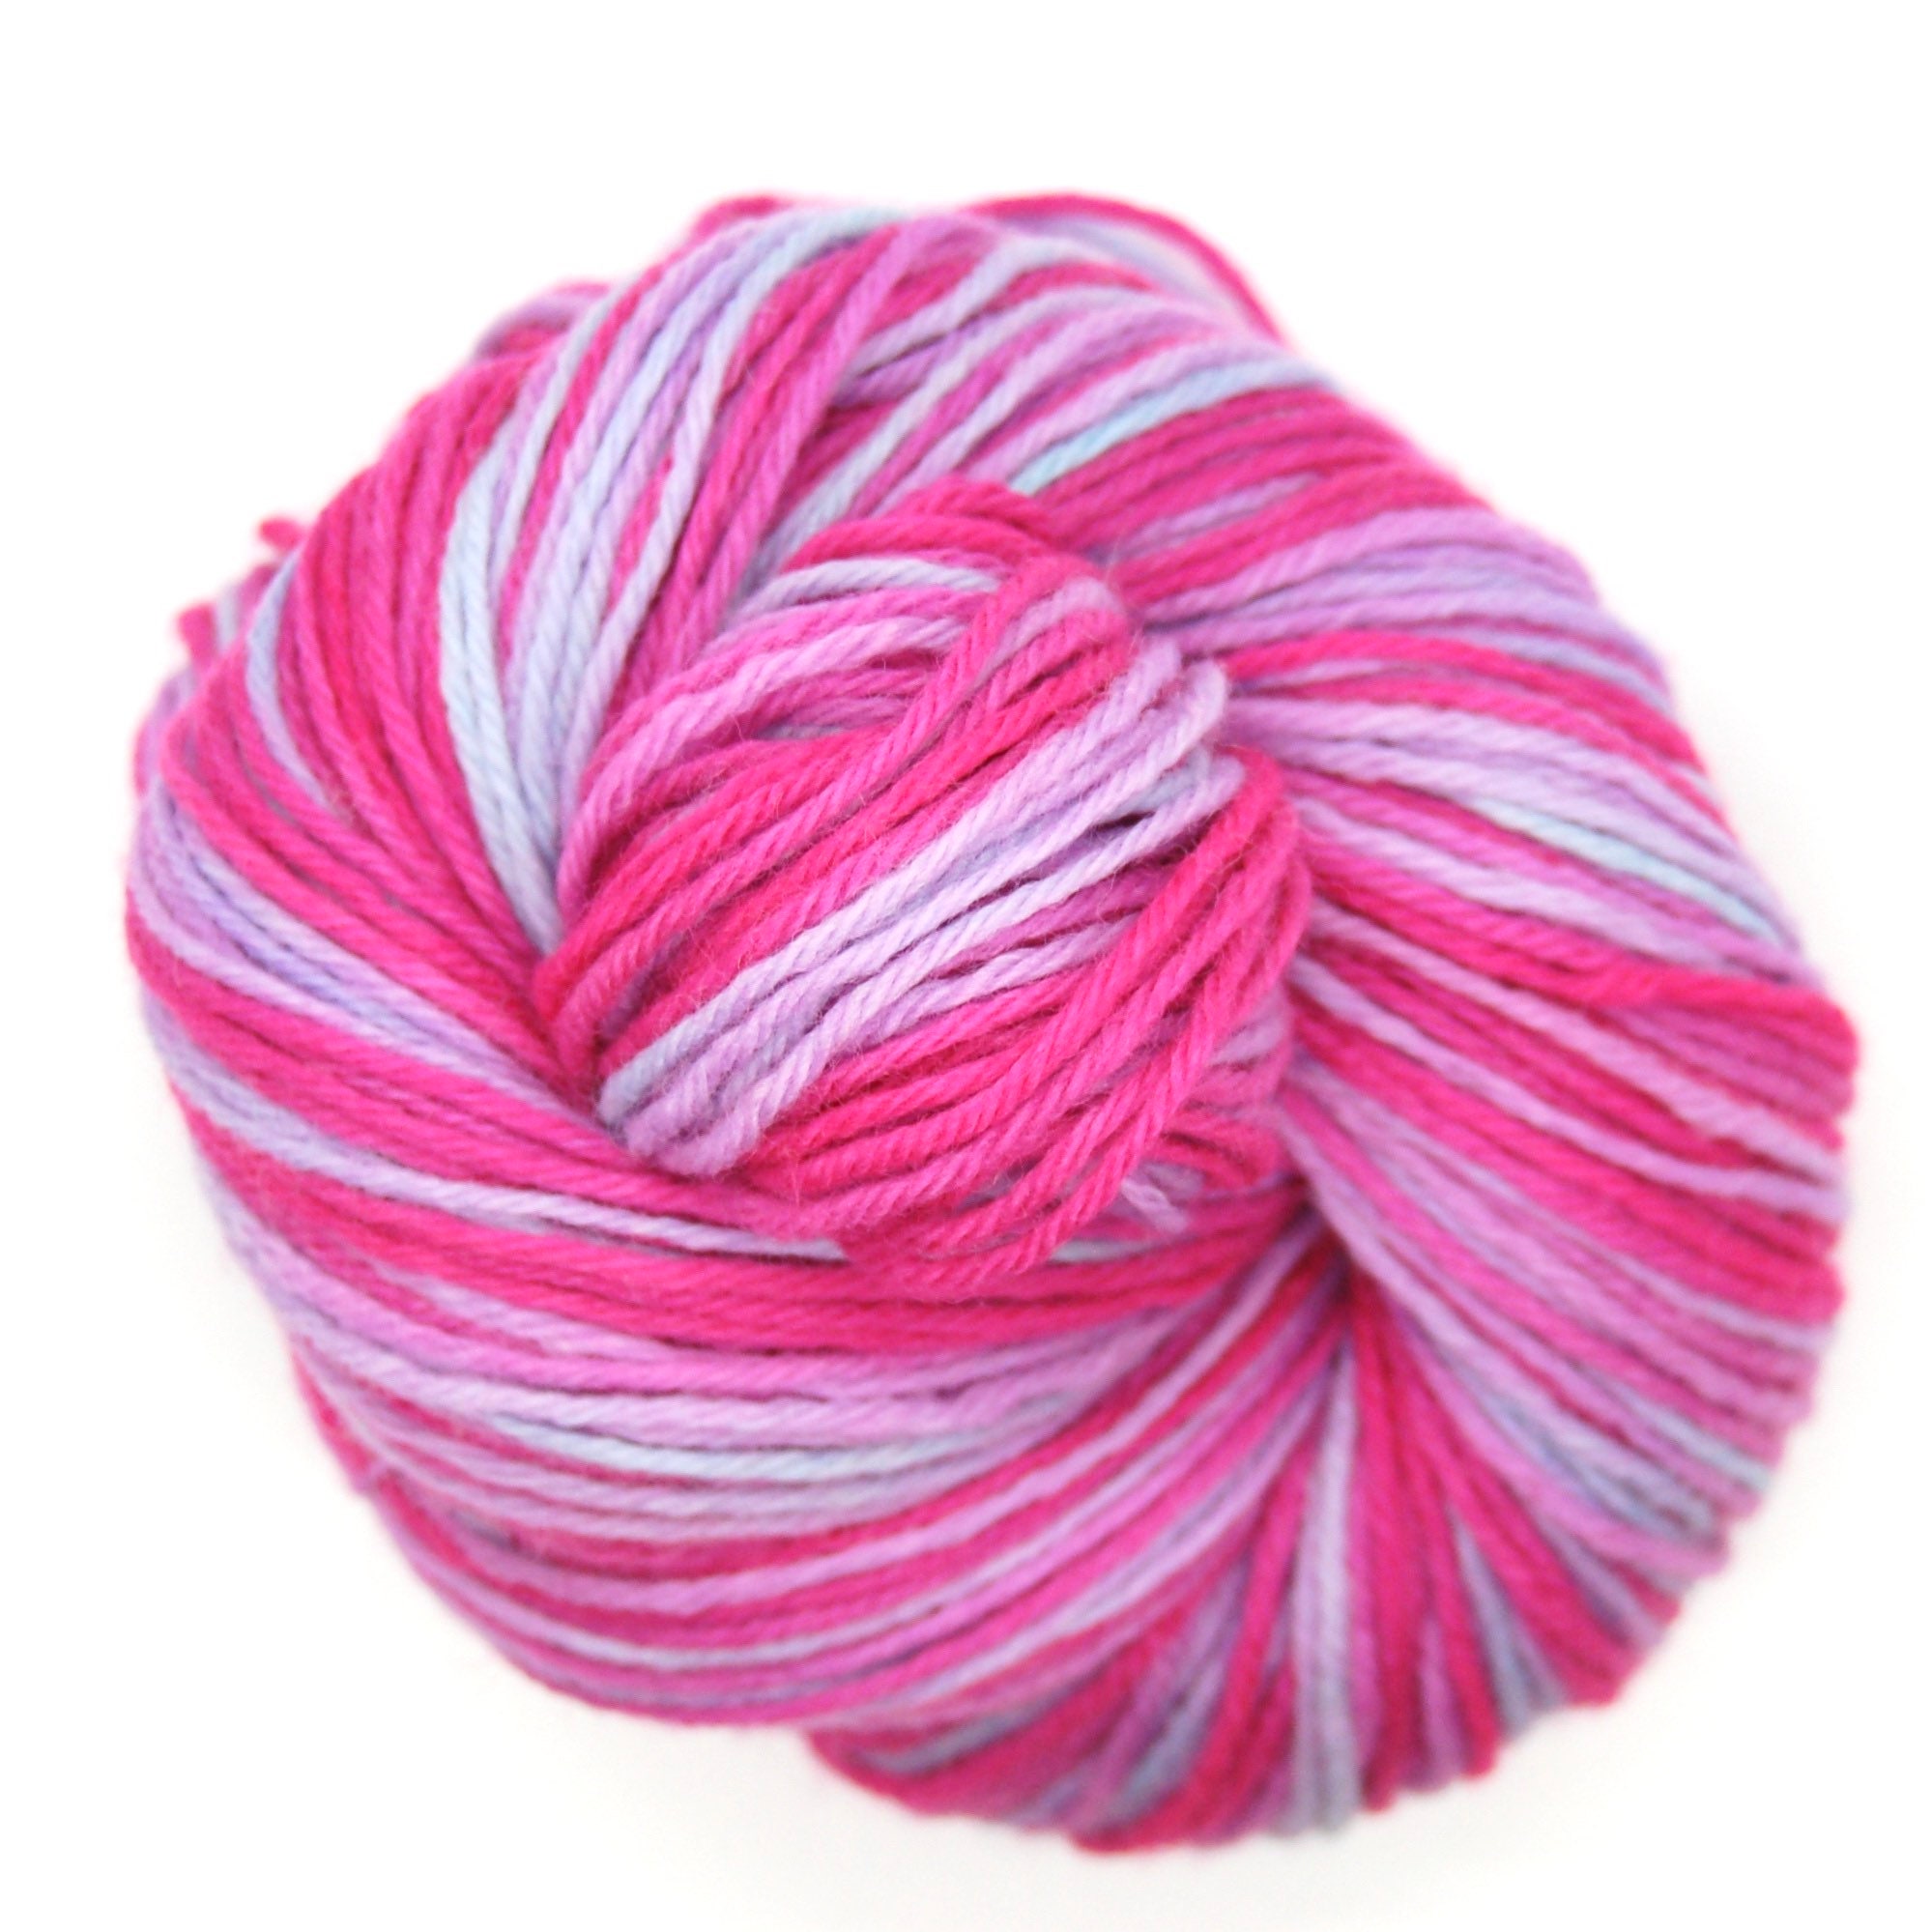 Pllieay 2x50g Packs Violet and Piggy Pink Yarn for Crocheting and Knitting,  Yarn for Beginners Knitting Yarn with Easy-to-See Stitches - Worsted